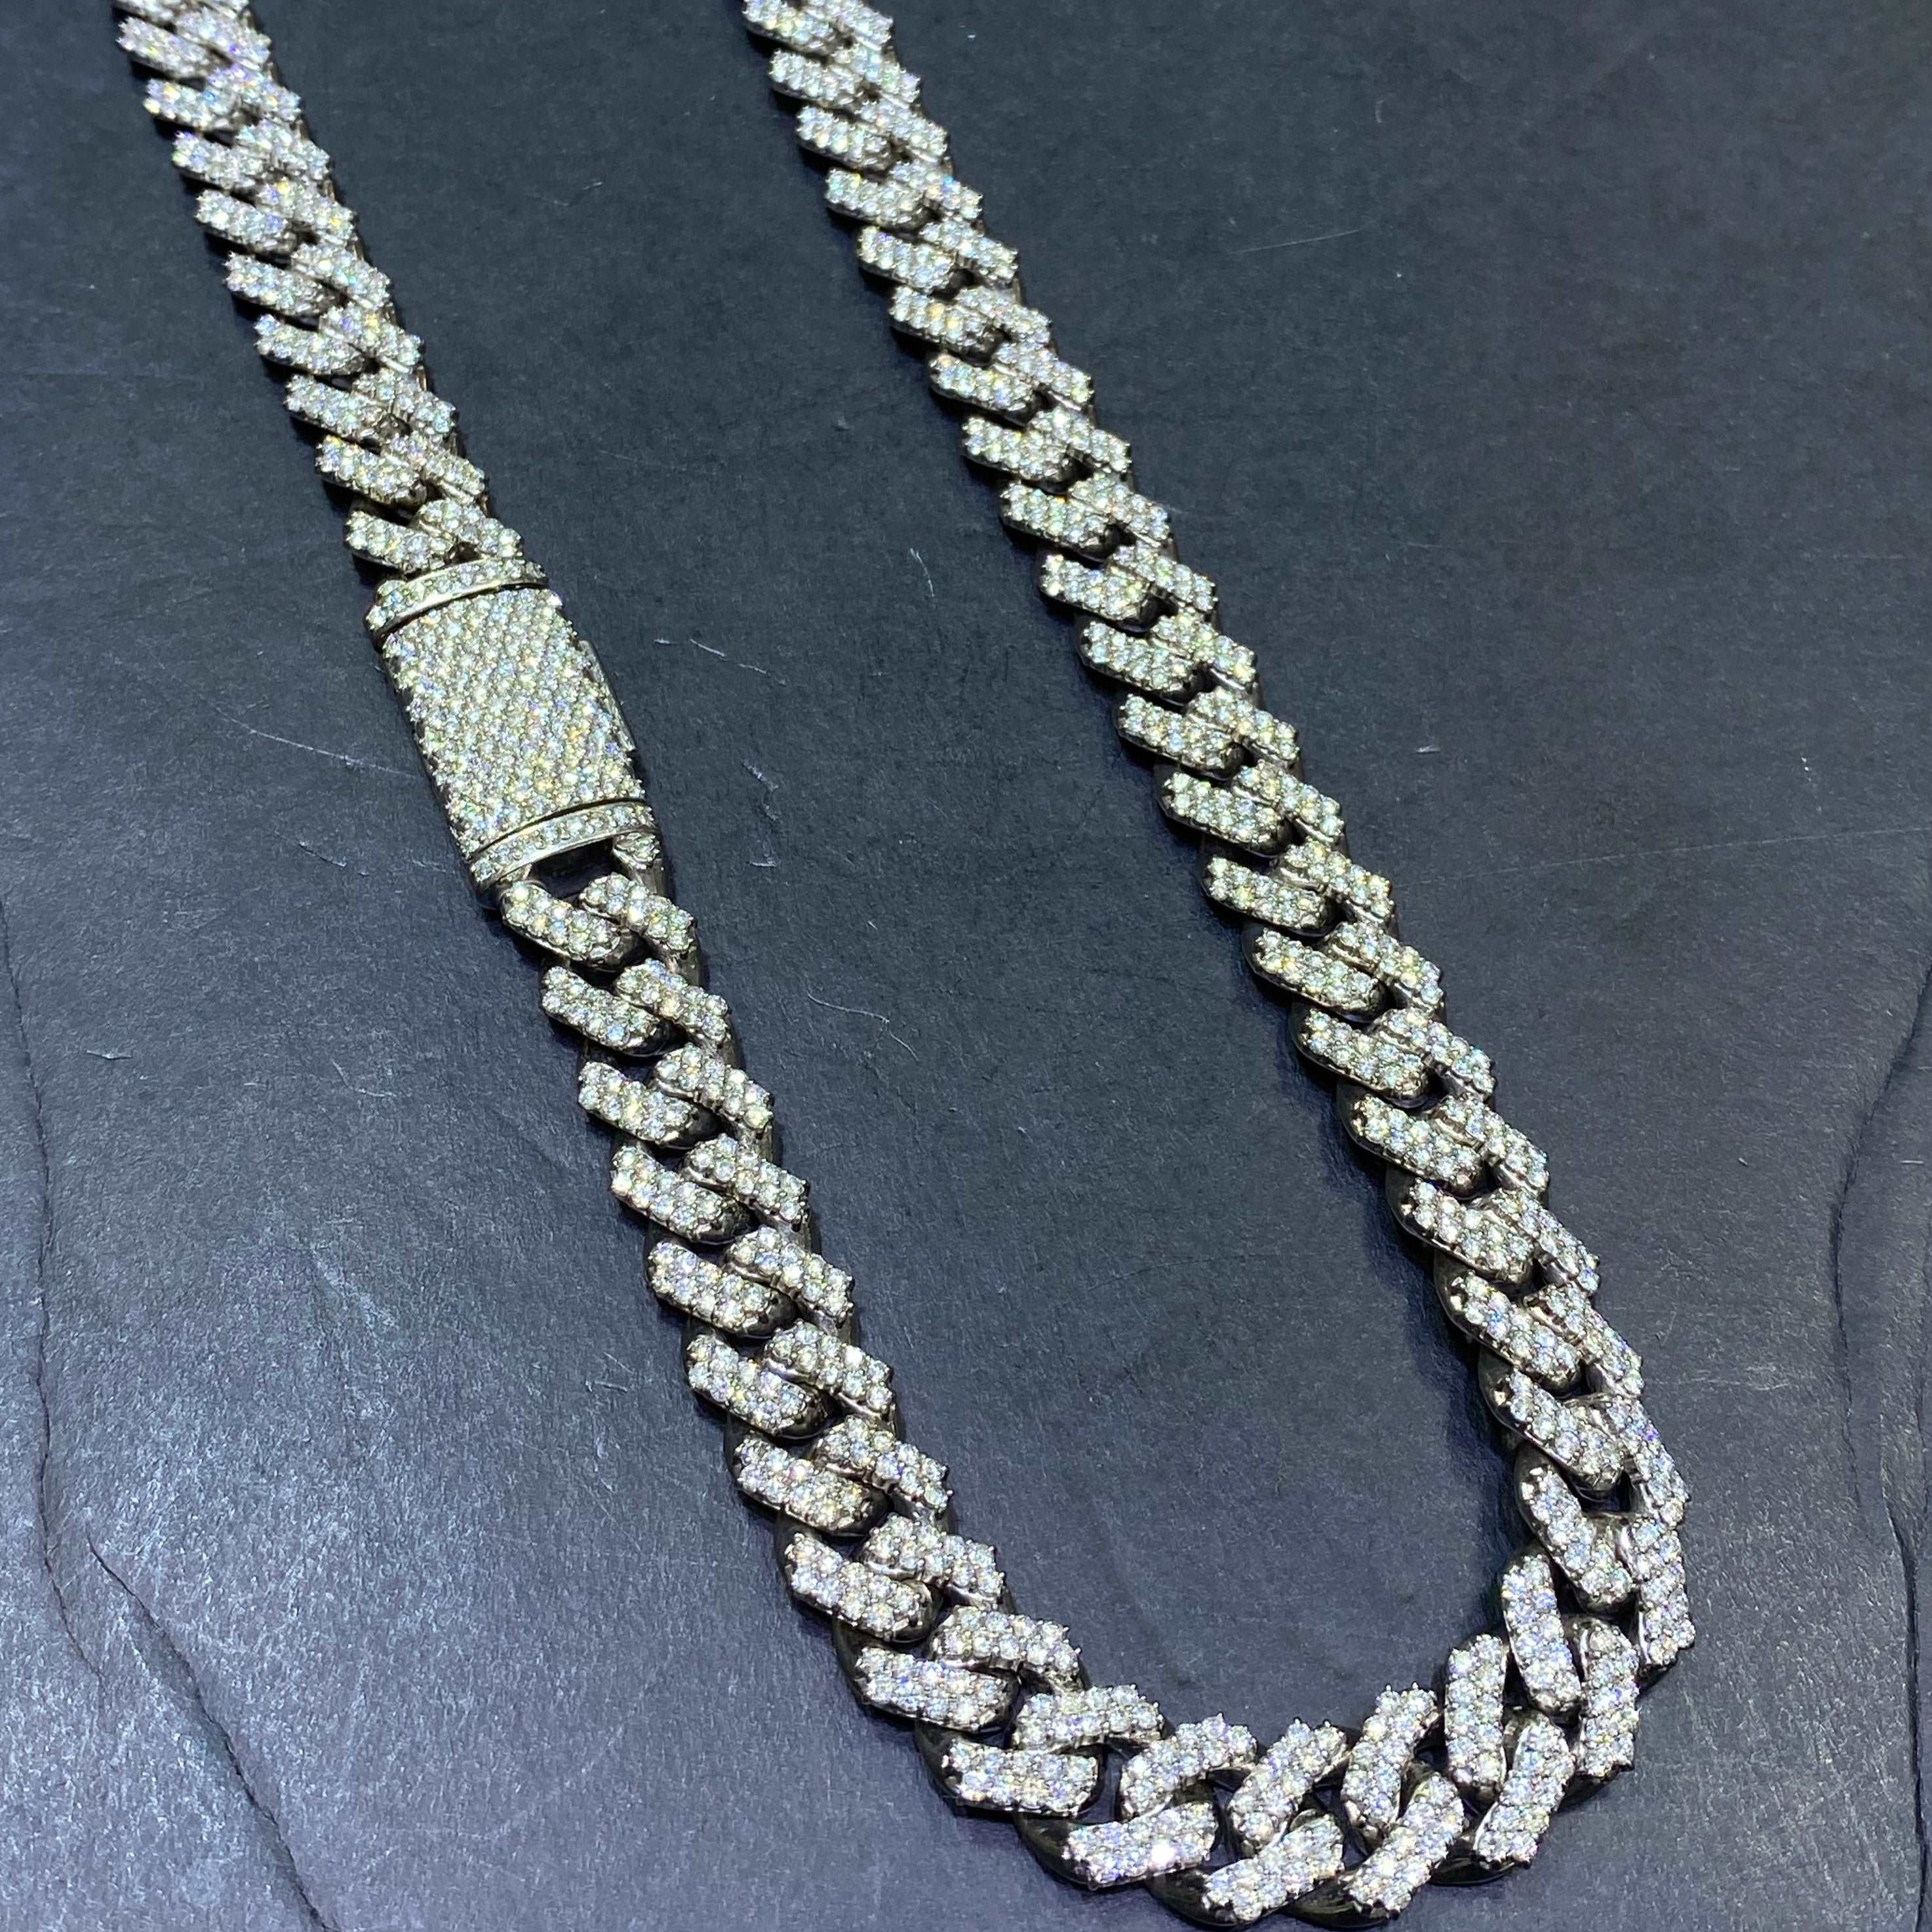 10k "Iced Out Chain" VS1 Miami Cuban Link with 24 cts Natural Diamonds,140 grams, 20 inches, 13.5mm Bust Down Necklace at renee de paris jewelry